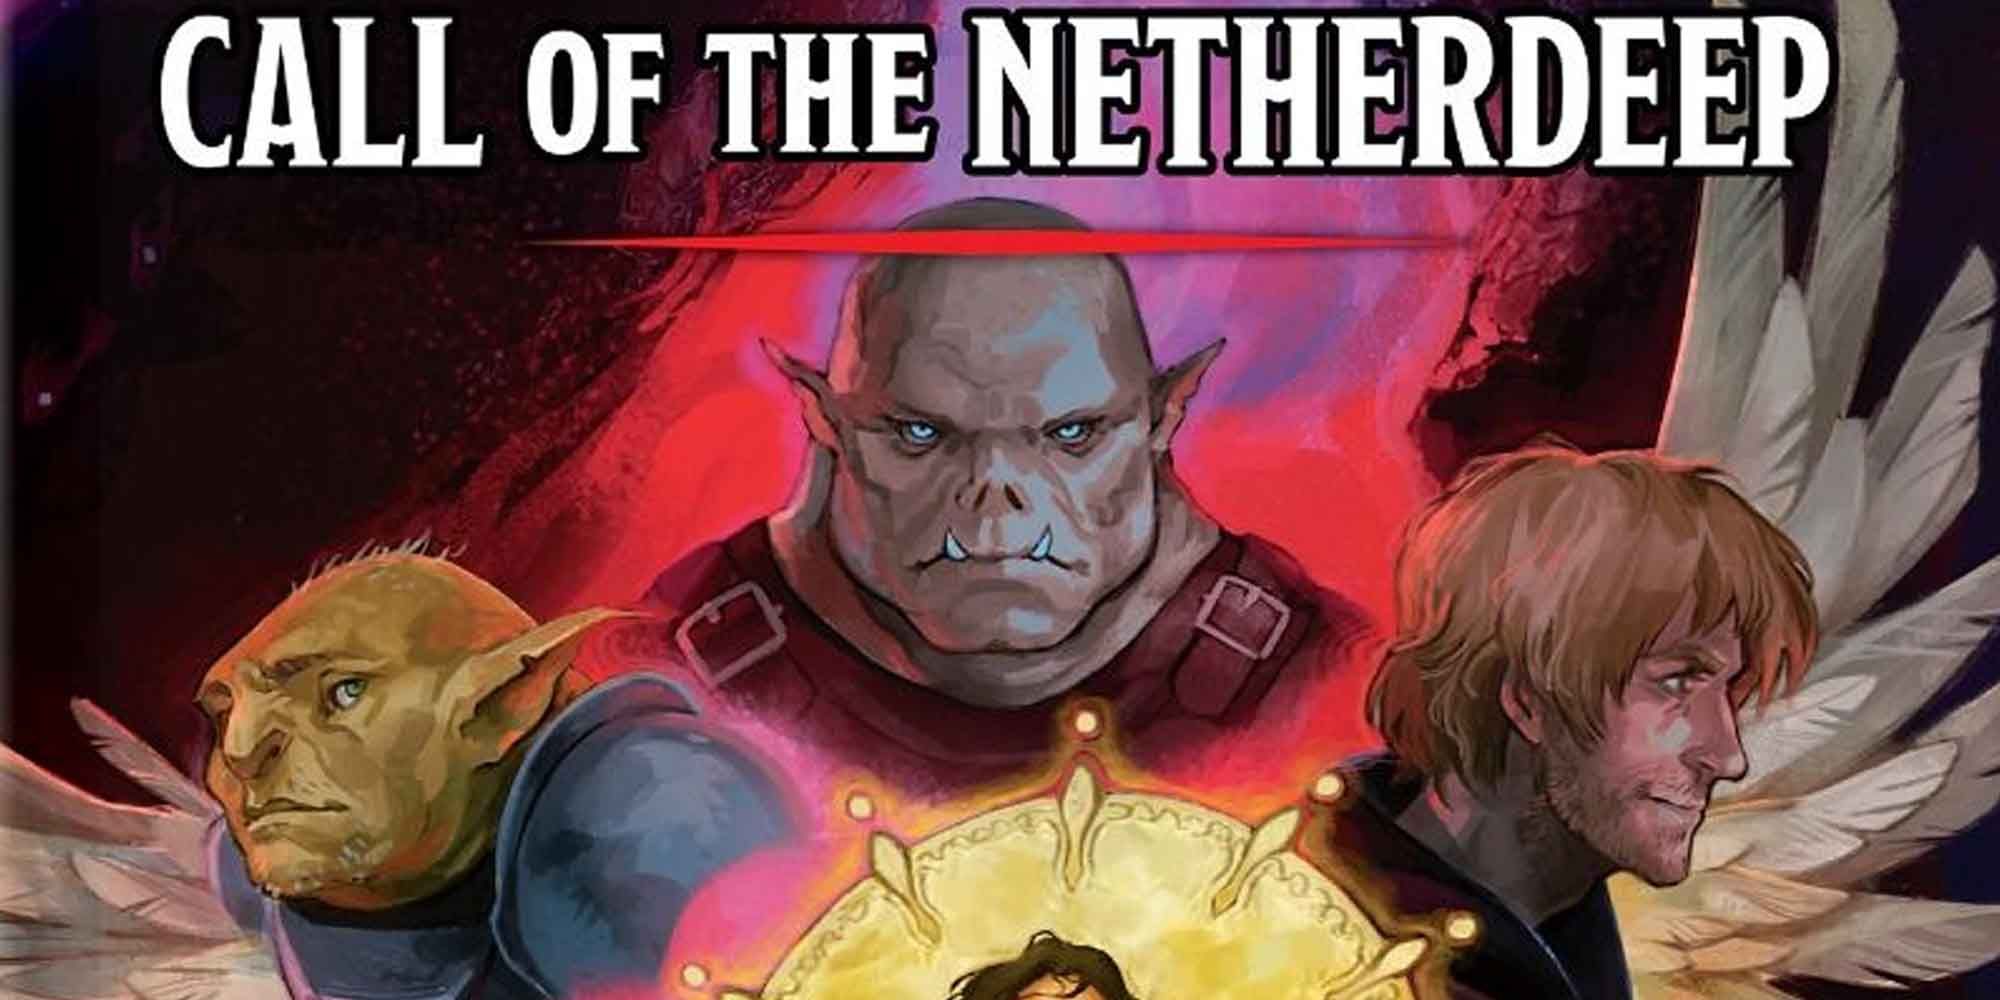 The cover of the Call of Netherdeep D&D Campaign